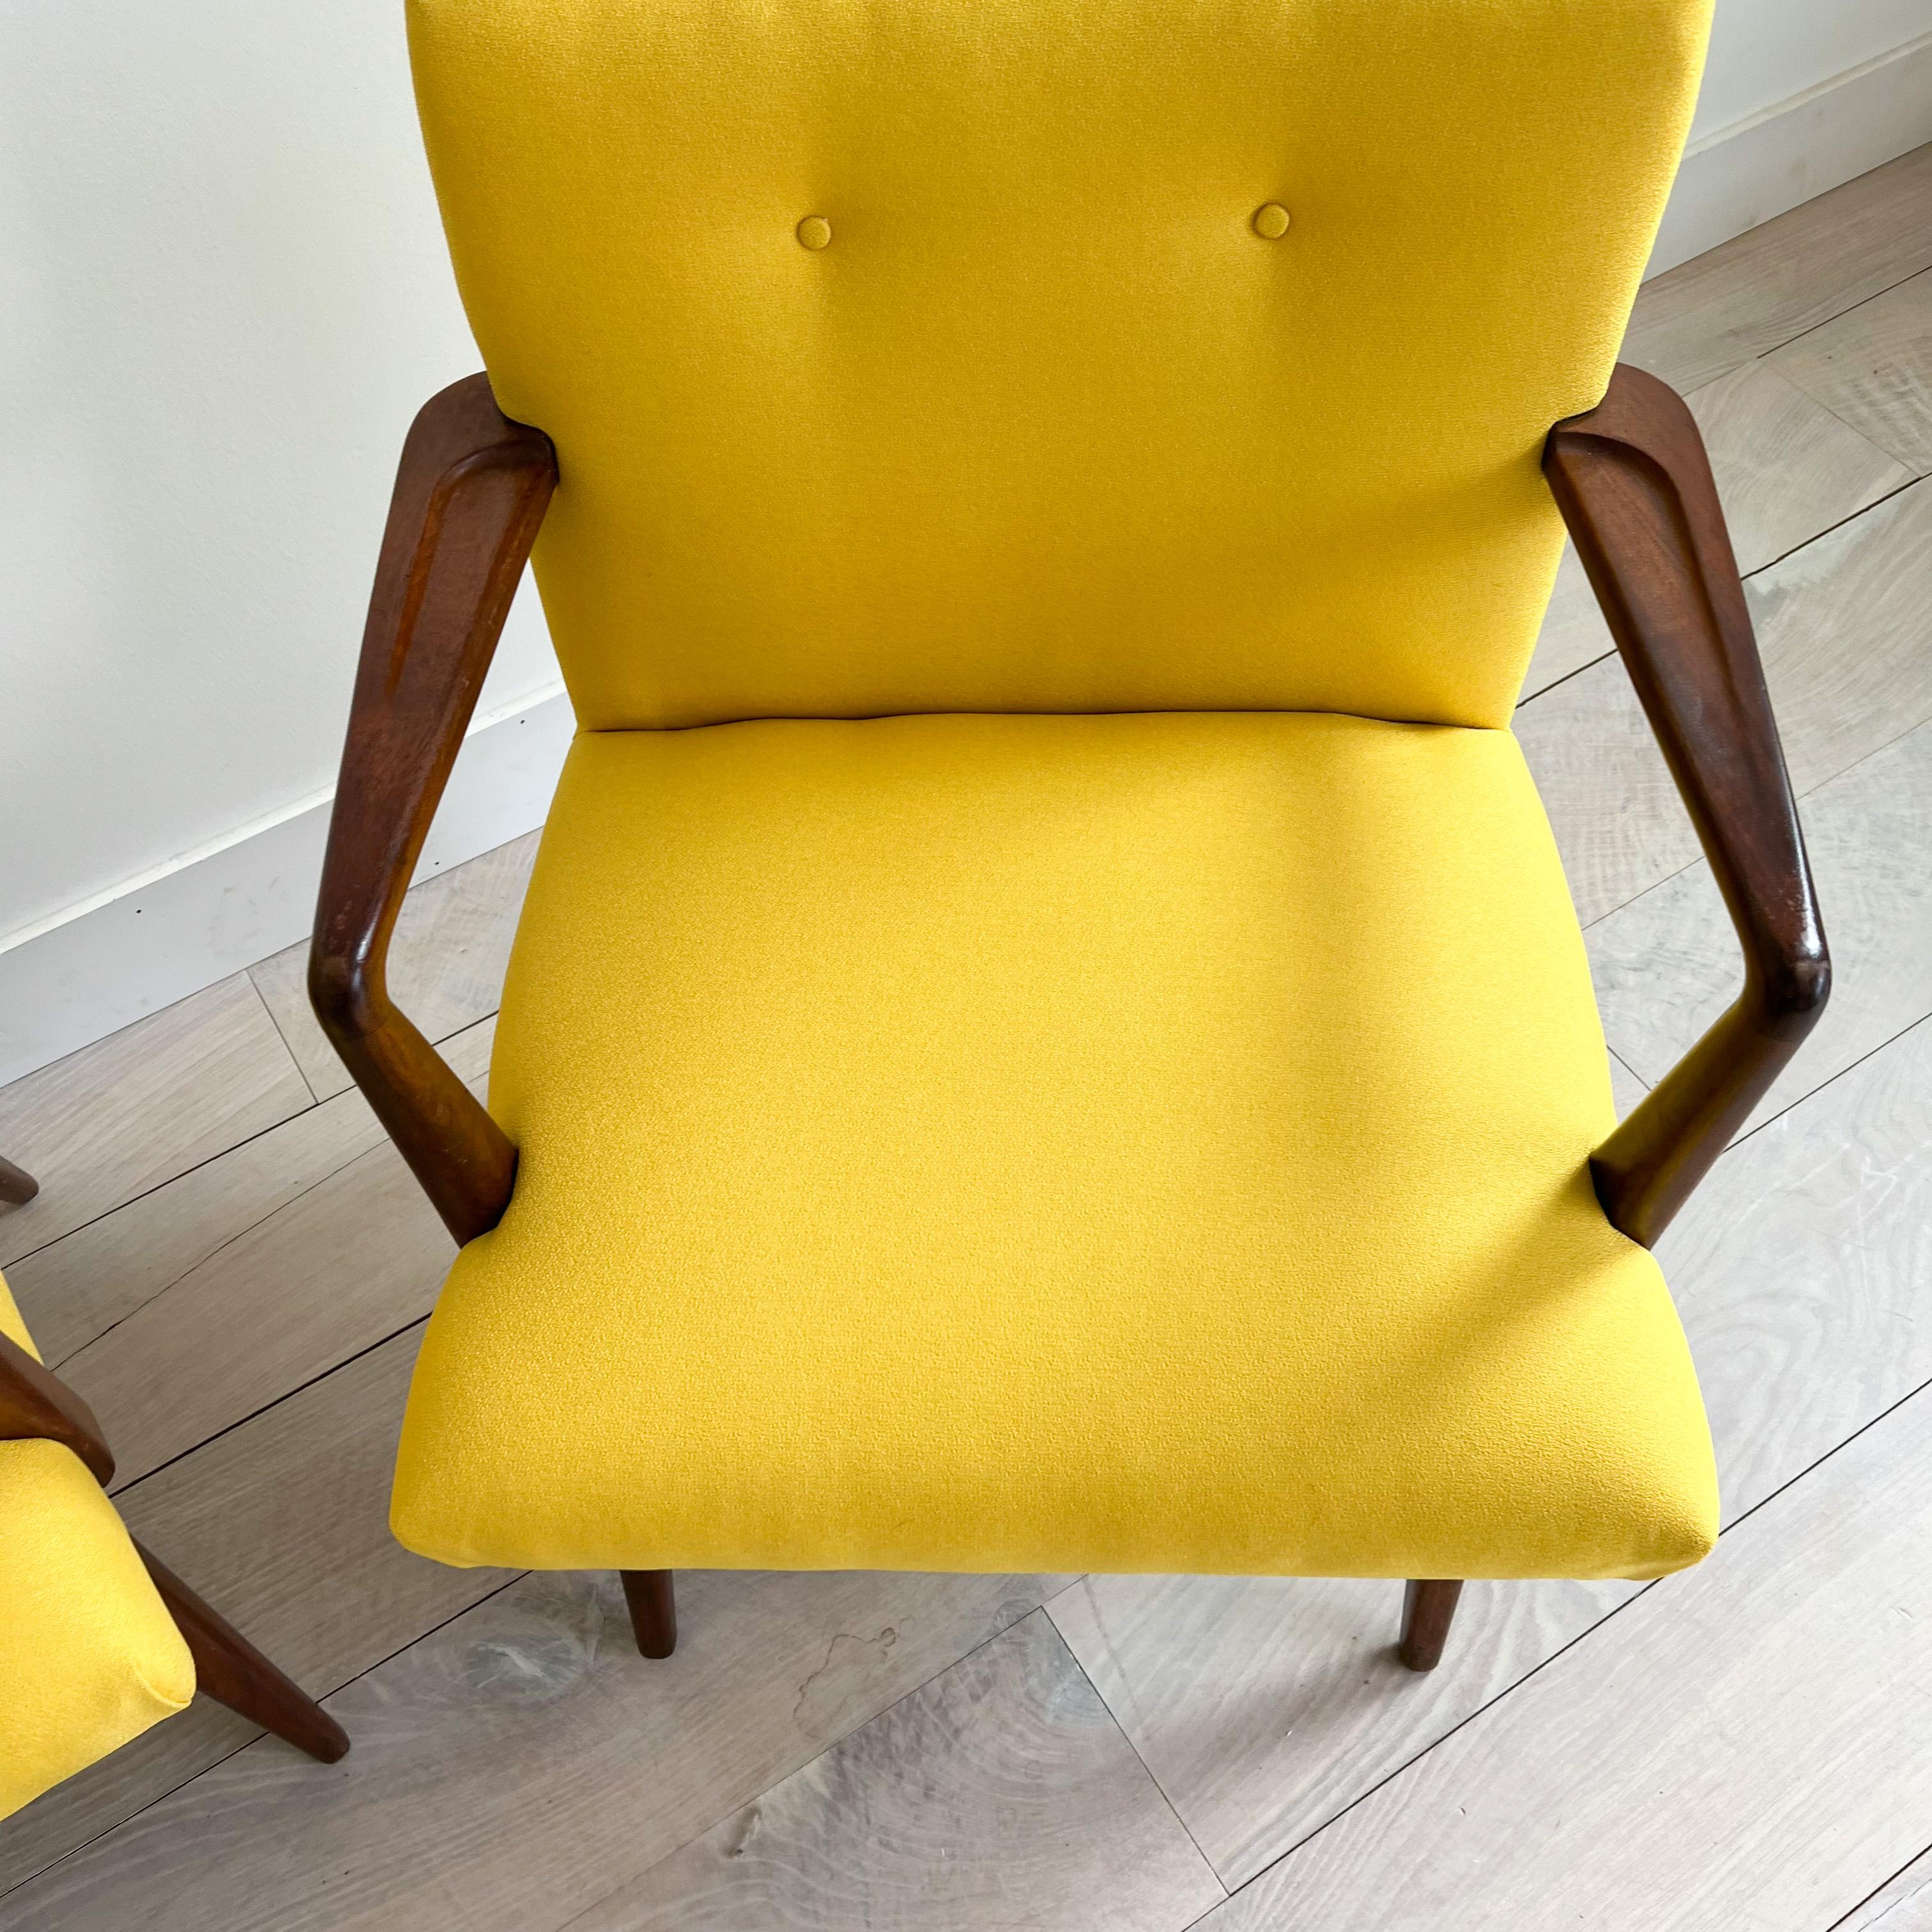 Set of 3 Mid-Century Jens Risom Armchairs with New Bright Yellow Upholstery 1